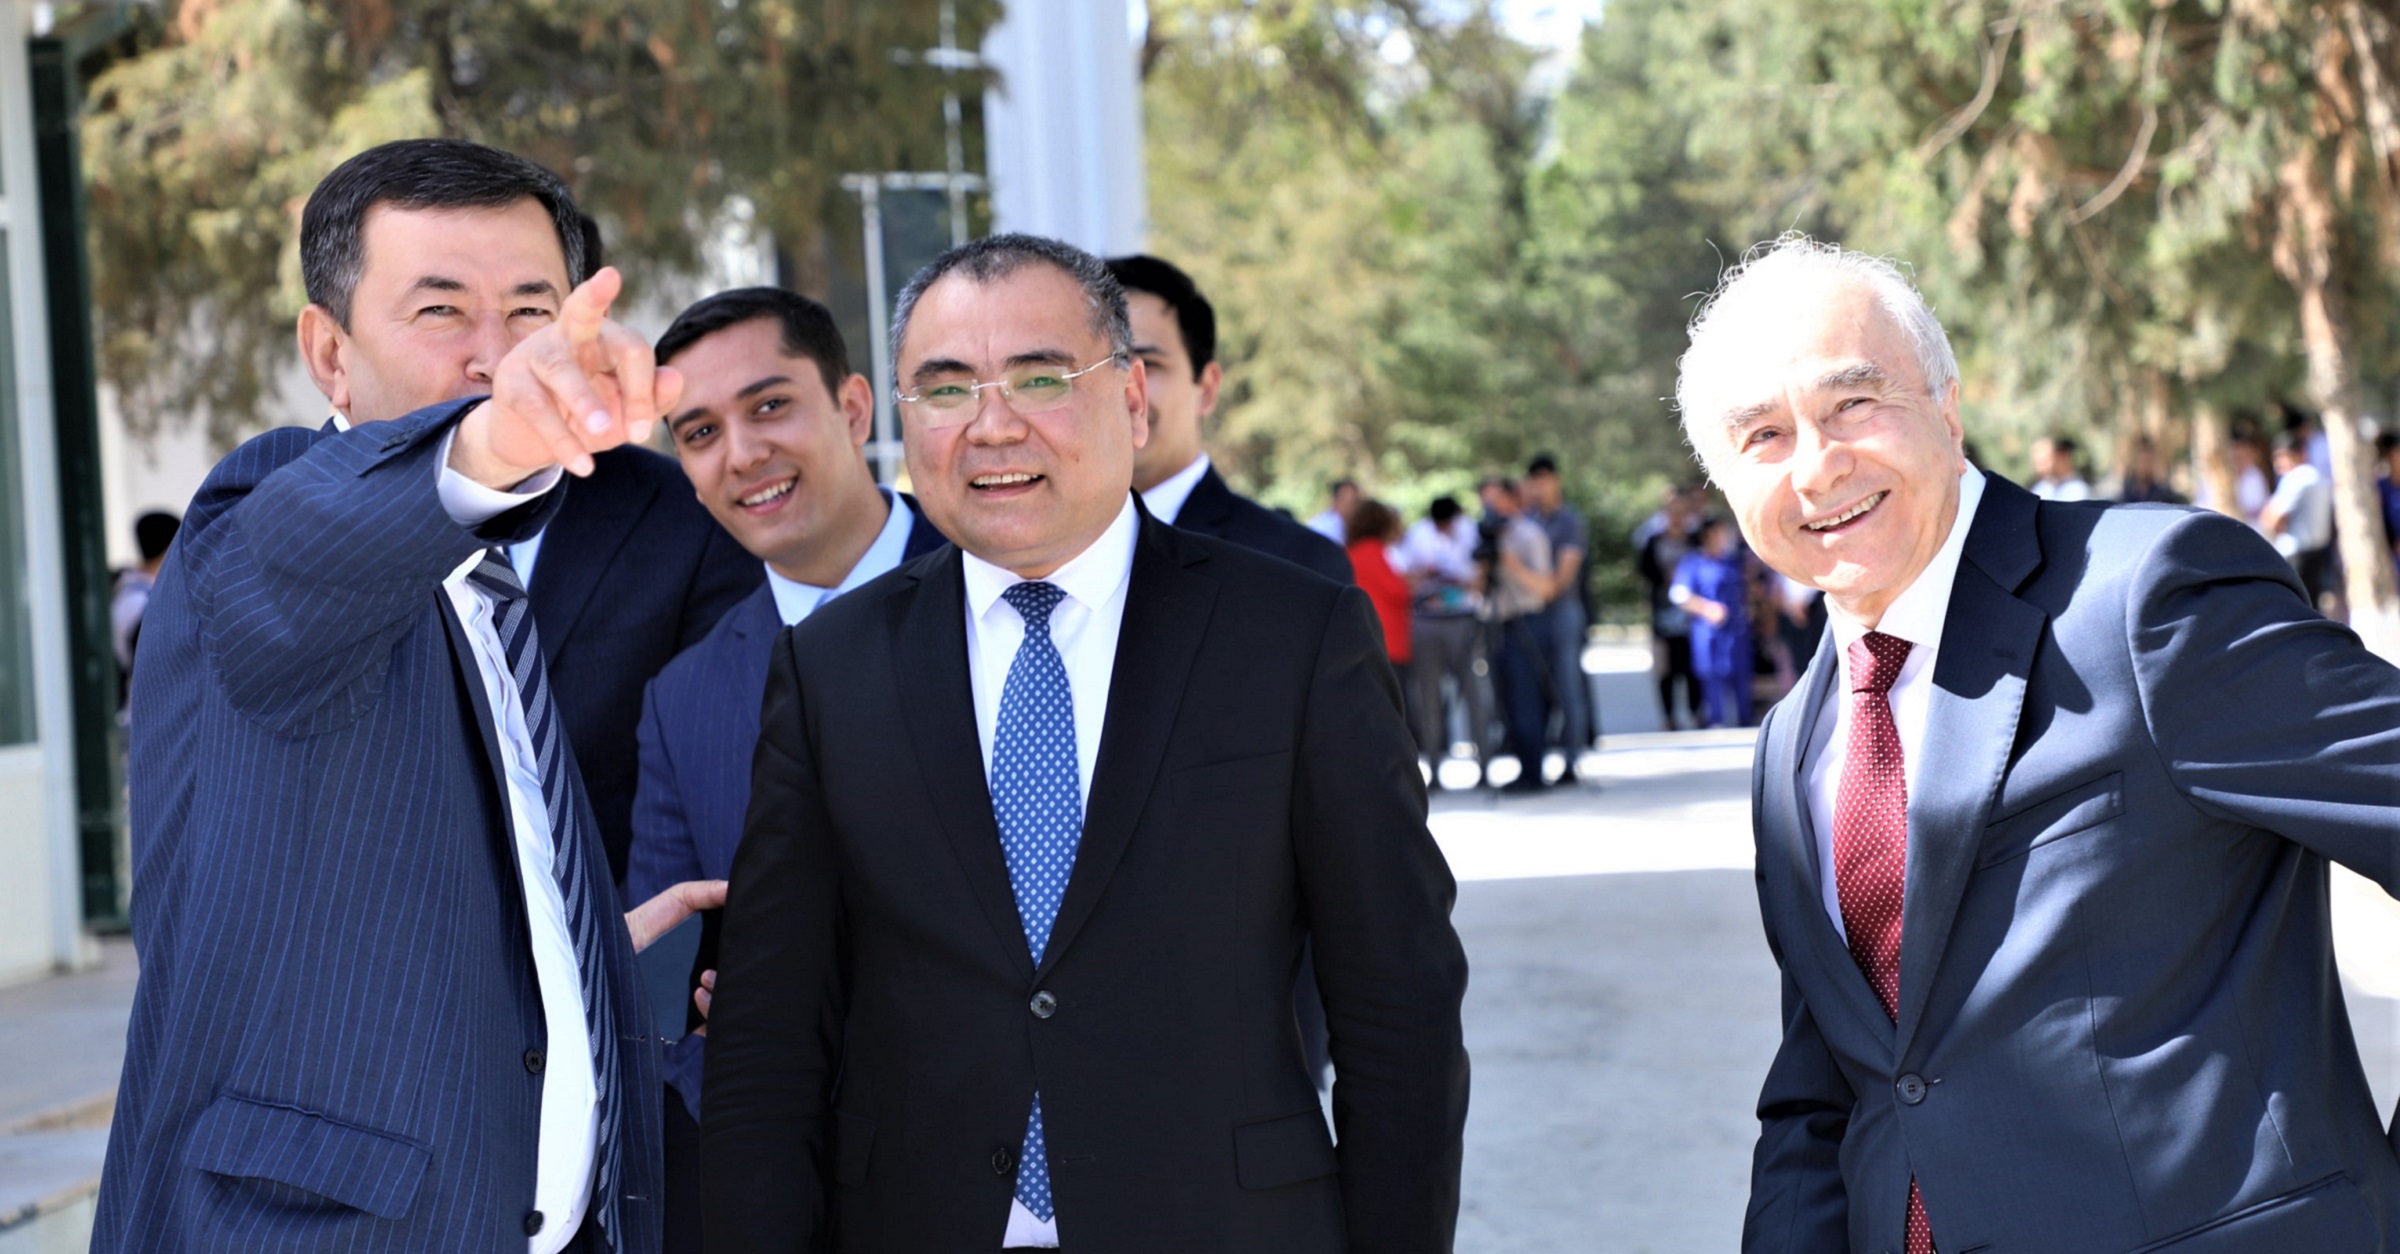 From the opening ceremony of the Samarkand Regional Youth Technopark, Located at Samarkand State University